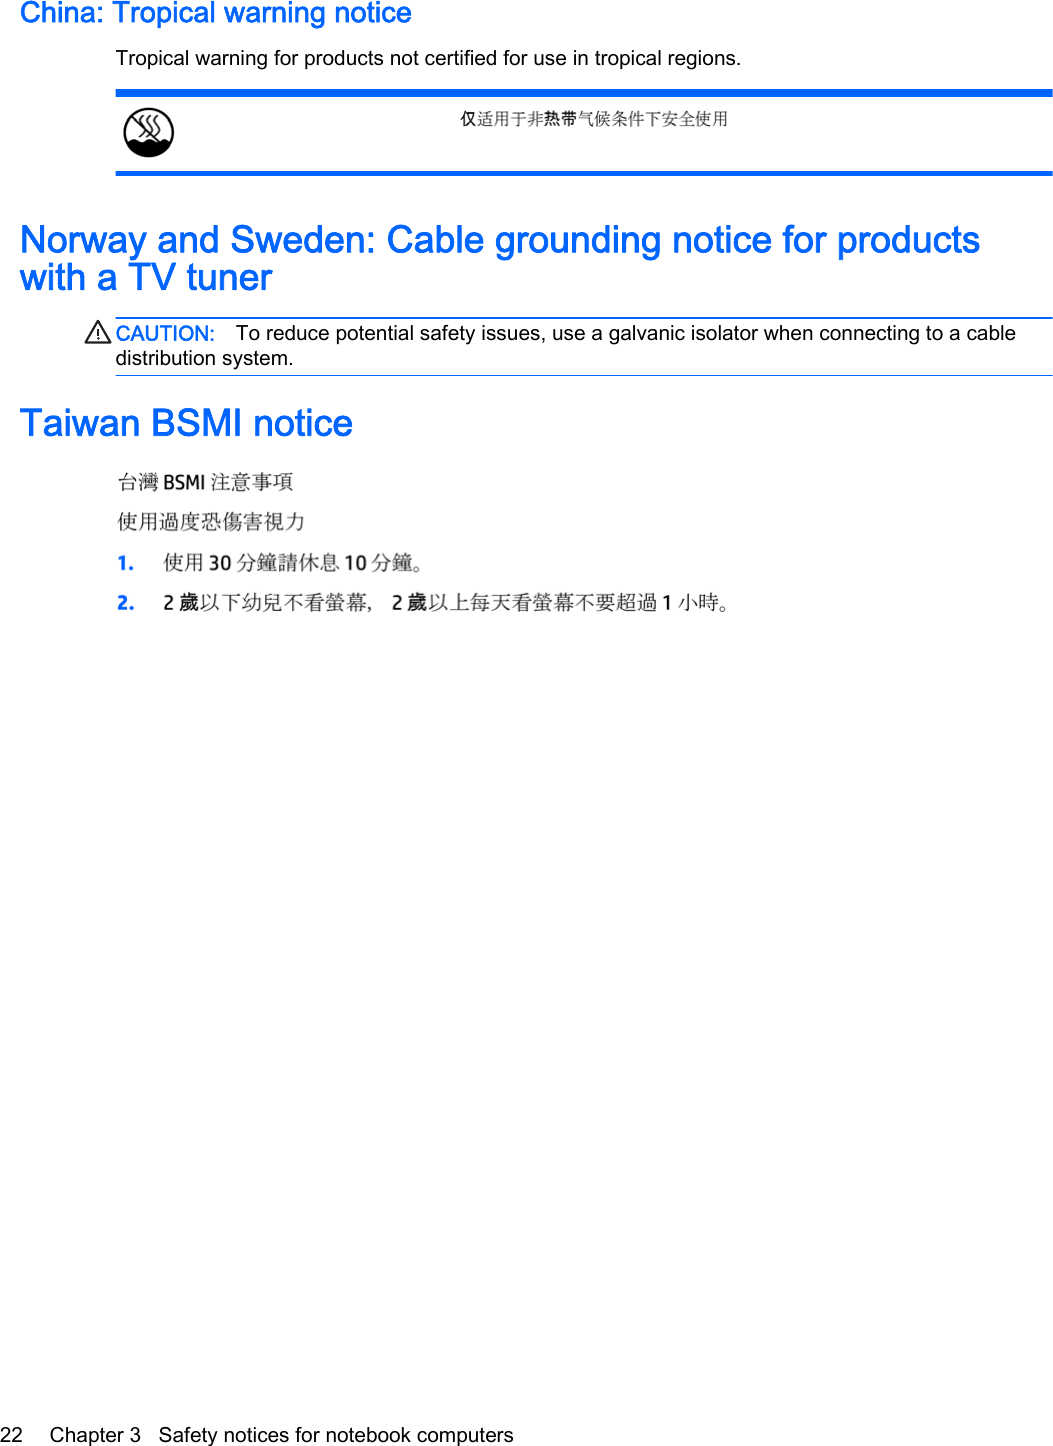 China: Tropical warning noticeTropical warning for products not certified for use in tropical regions.Norway and Sweden: Cable grounding notice for productswith a TV tunerCAUTION: To reduce potential safety issues, use a galvanic isolator when connecting to a cabledistribution system.Taiwan BSMI notice22 Chapter 3   Safety notices for notebook computers